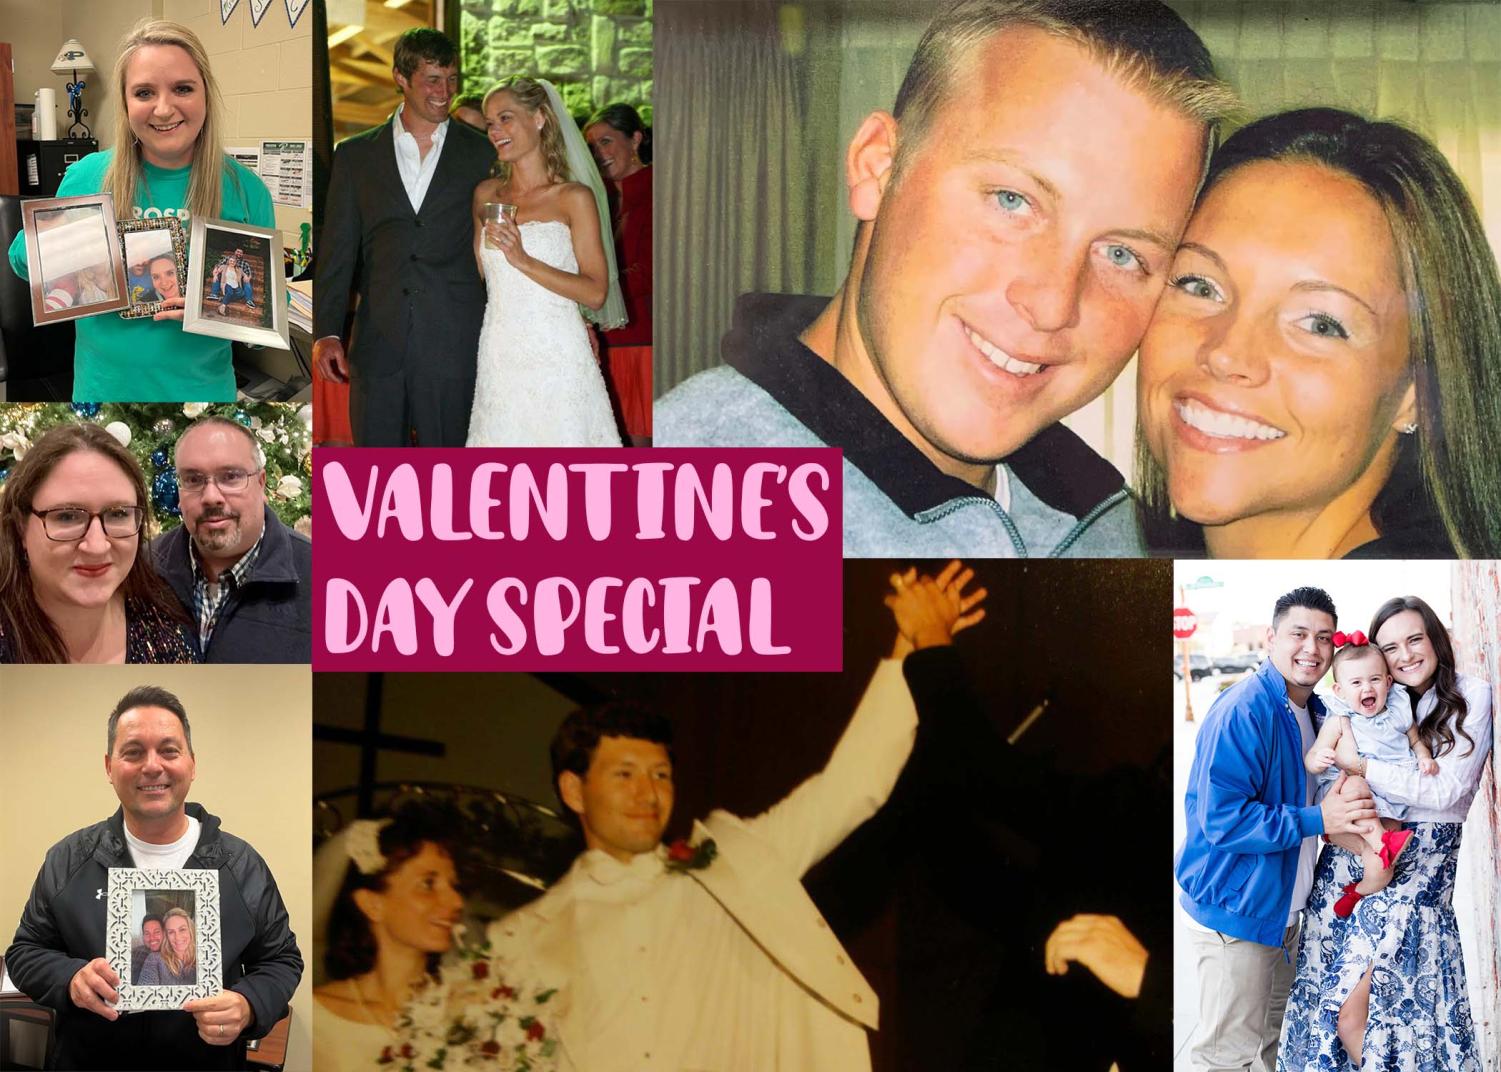 Video: Valentine’s Day Special – Staff share stories of meeting, falling in love with spouse